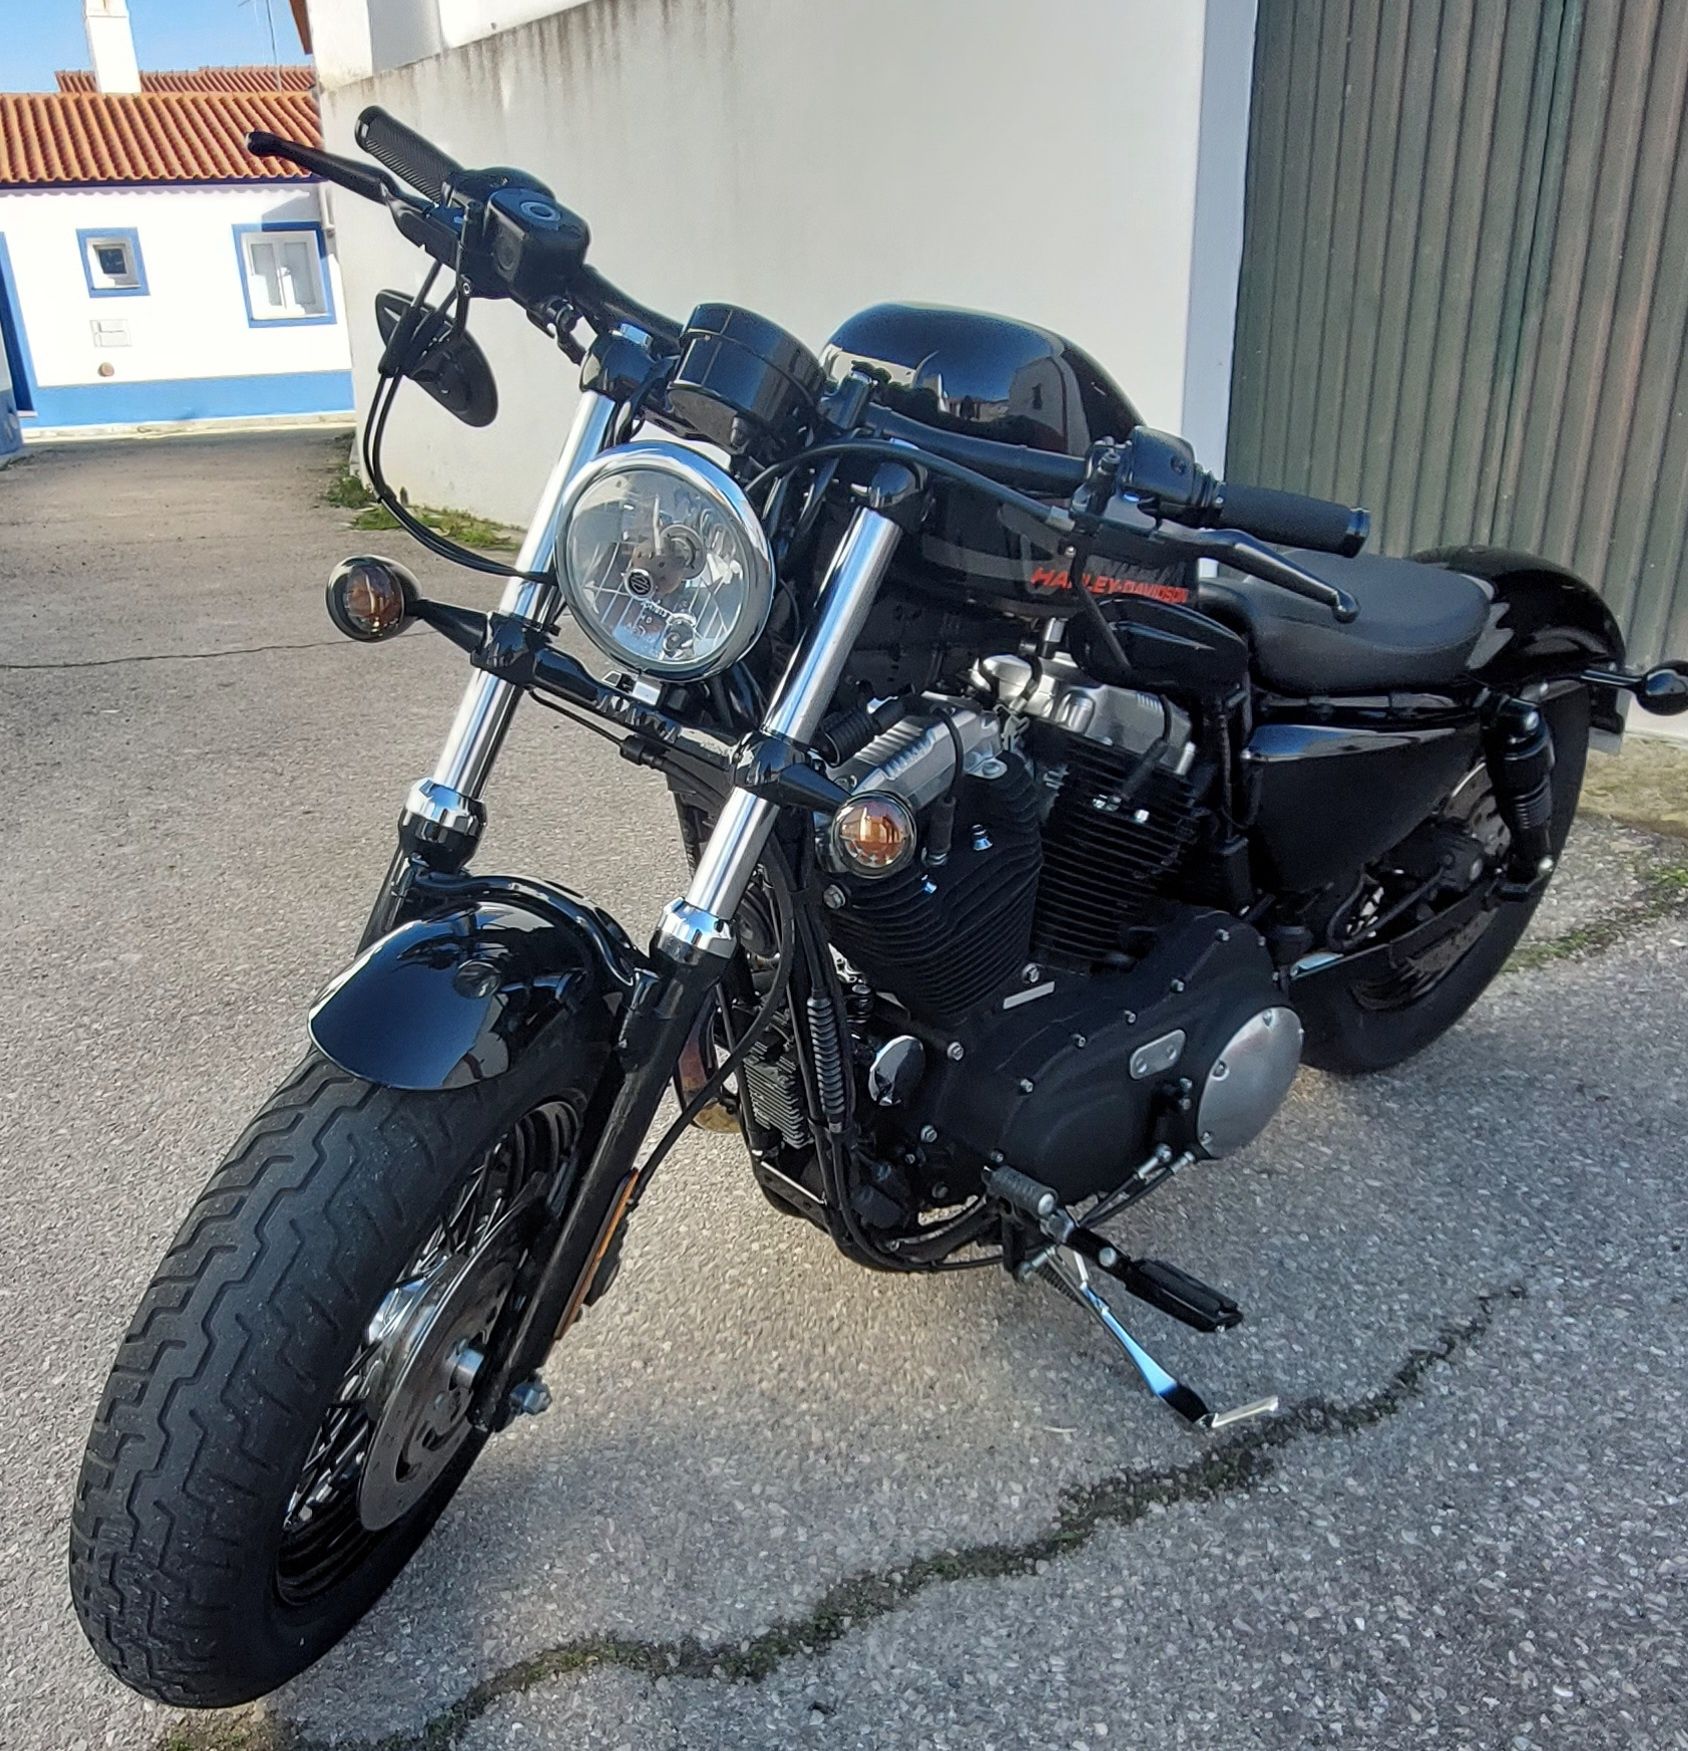 Harley Davidson Forty Eight - Motociclos - Scooters - OLX Portugal